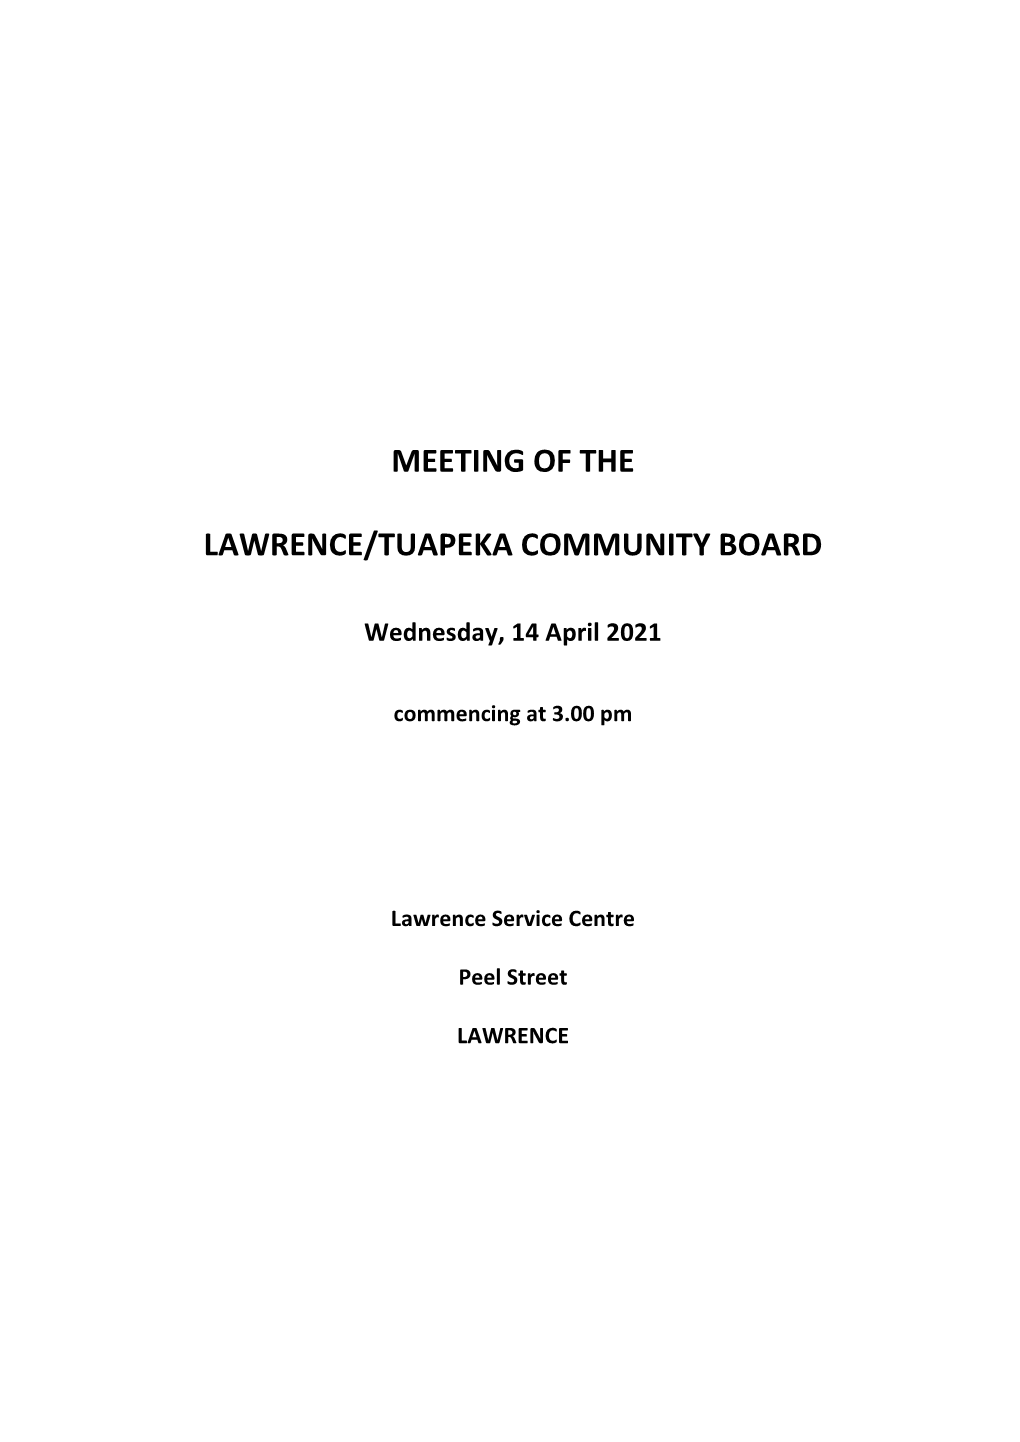 Meeting of the Lawrence/Tuapeka Community Board Will Be Held in the Lawrence Service Centre, Peel Street, Lawrence on Wednesday, 14 April 2021, Commencing at 3.00 Pm